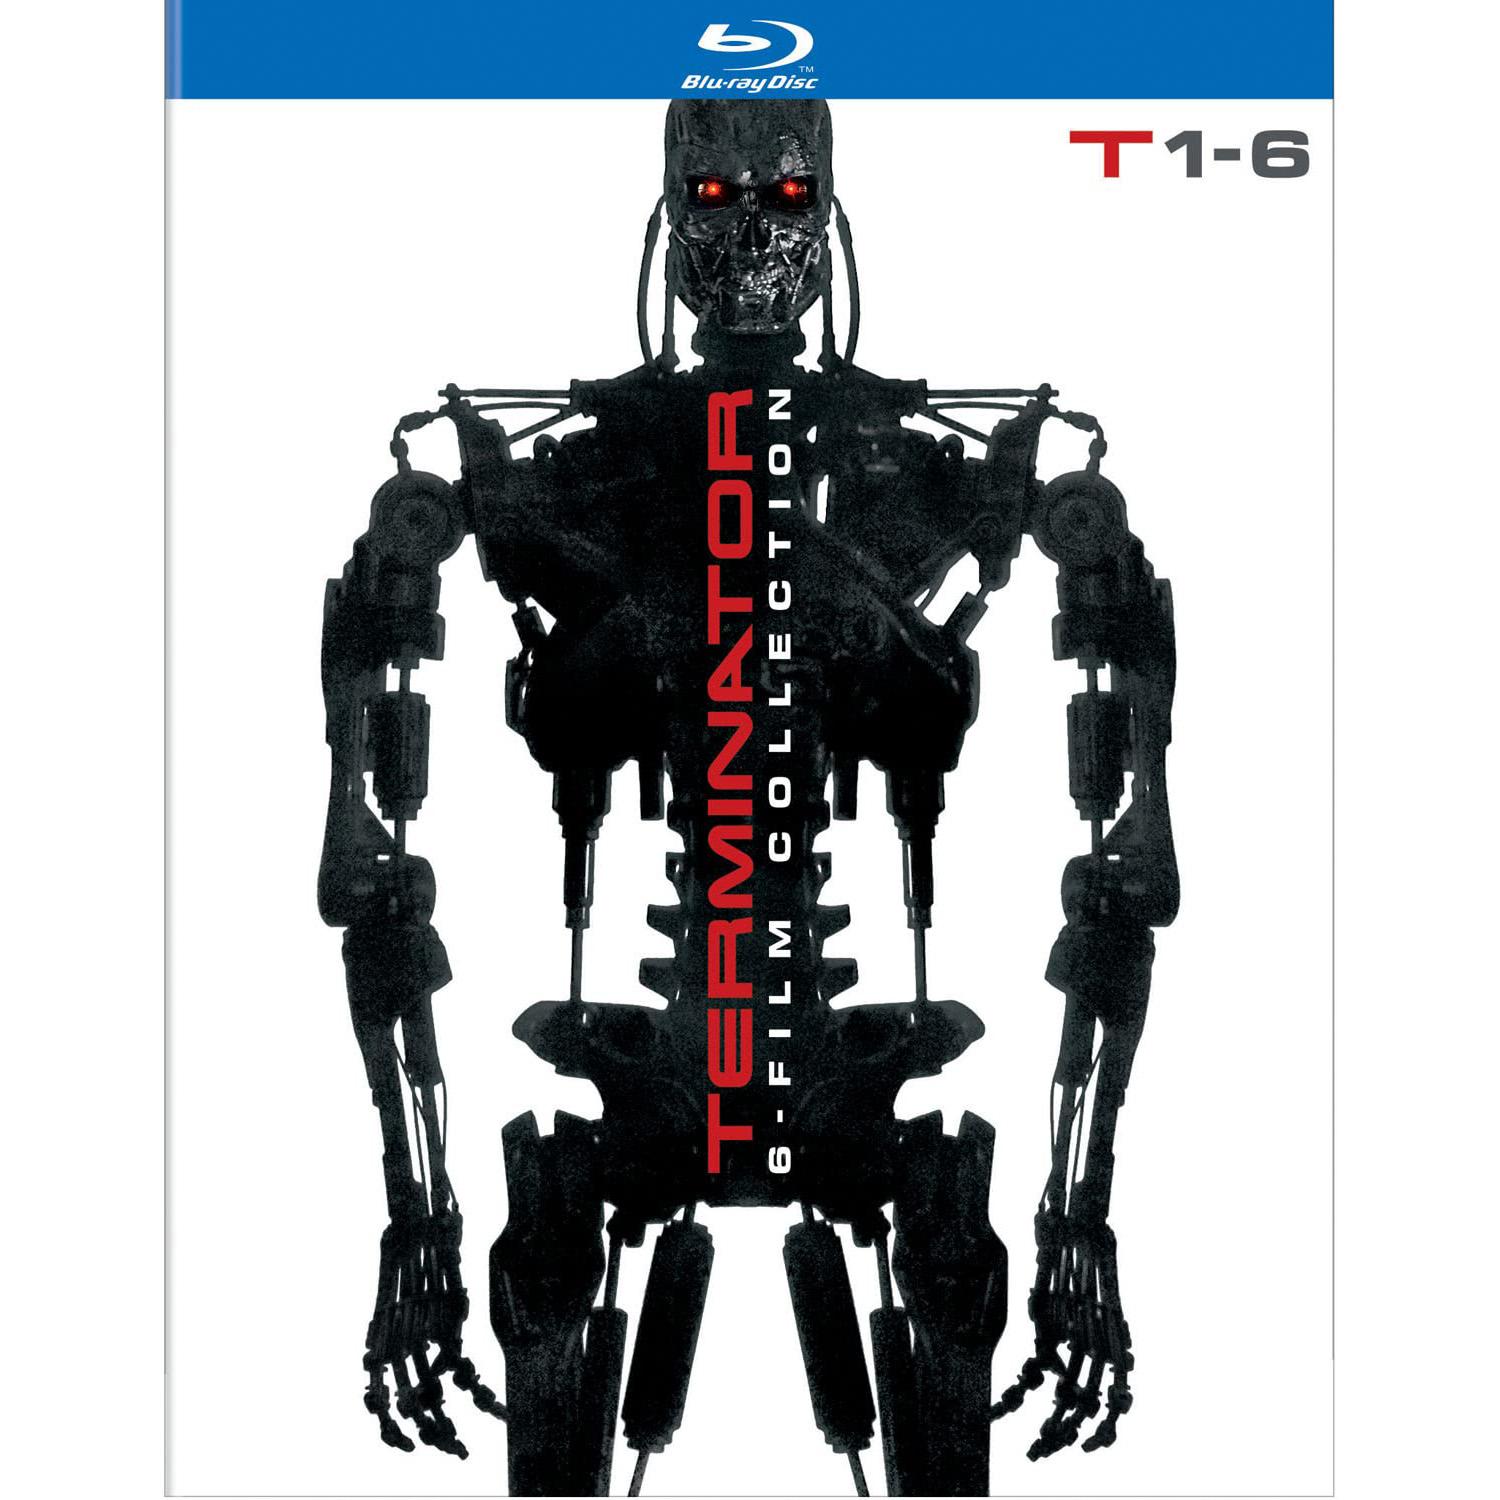 Terminator 6-Film Collection Blu-ray Set for $20.66